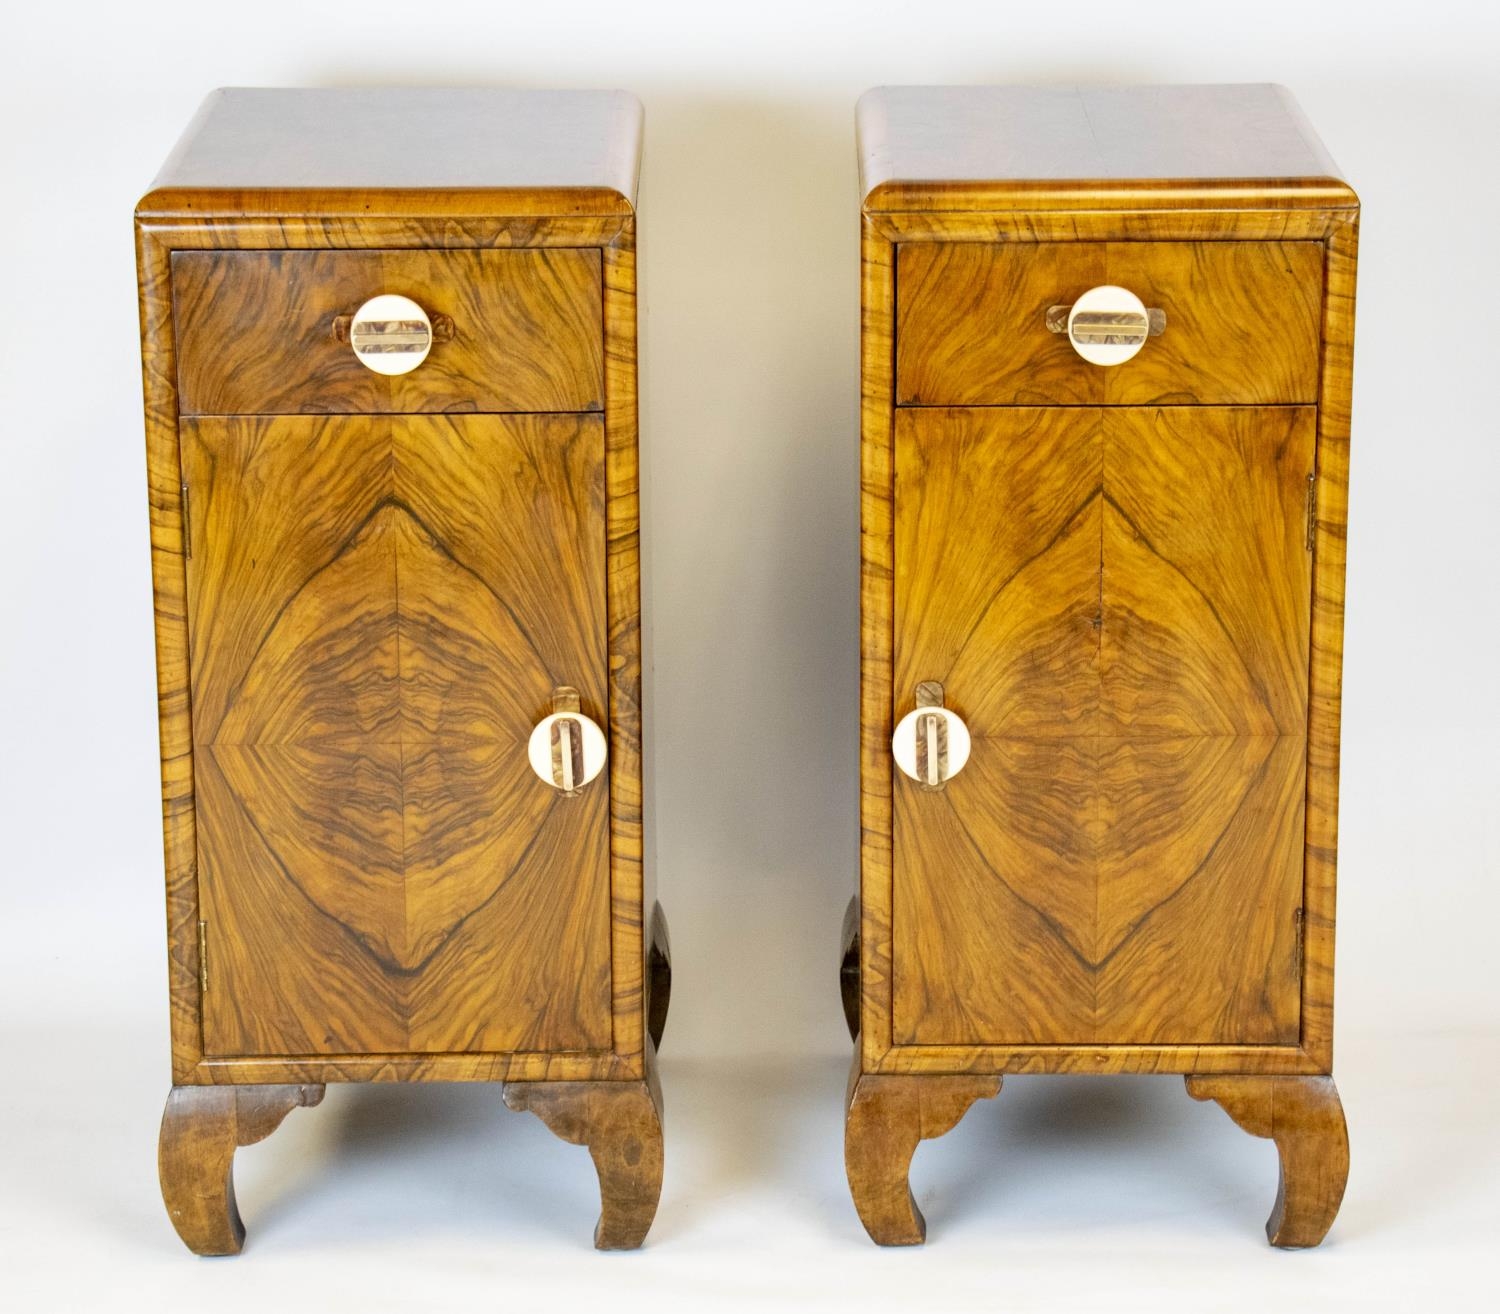 BEDSIDE CABINETS, 80cm H x 37cm W x 43cm D, a pair, Art Deco walnut, each with drawer and door